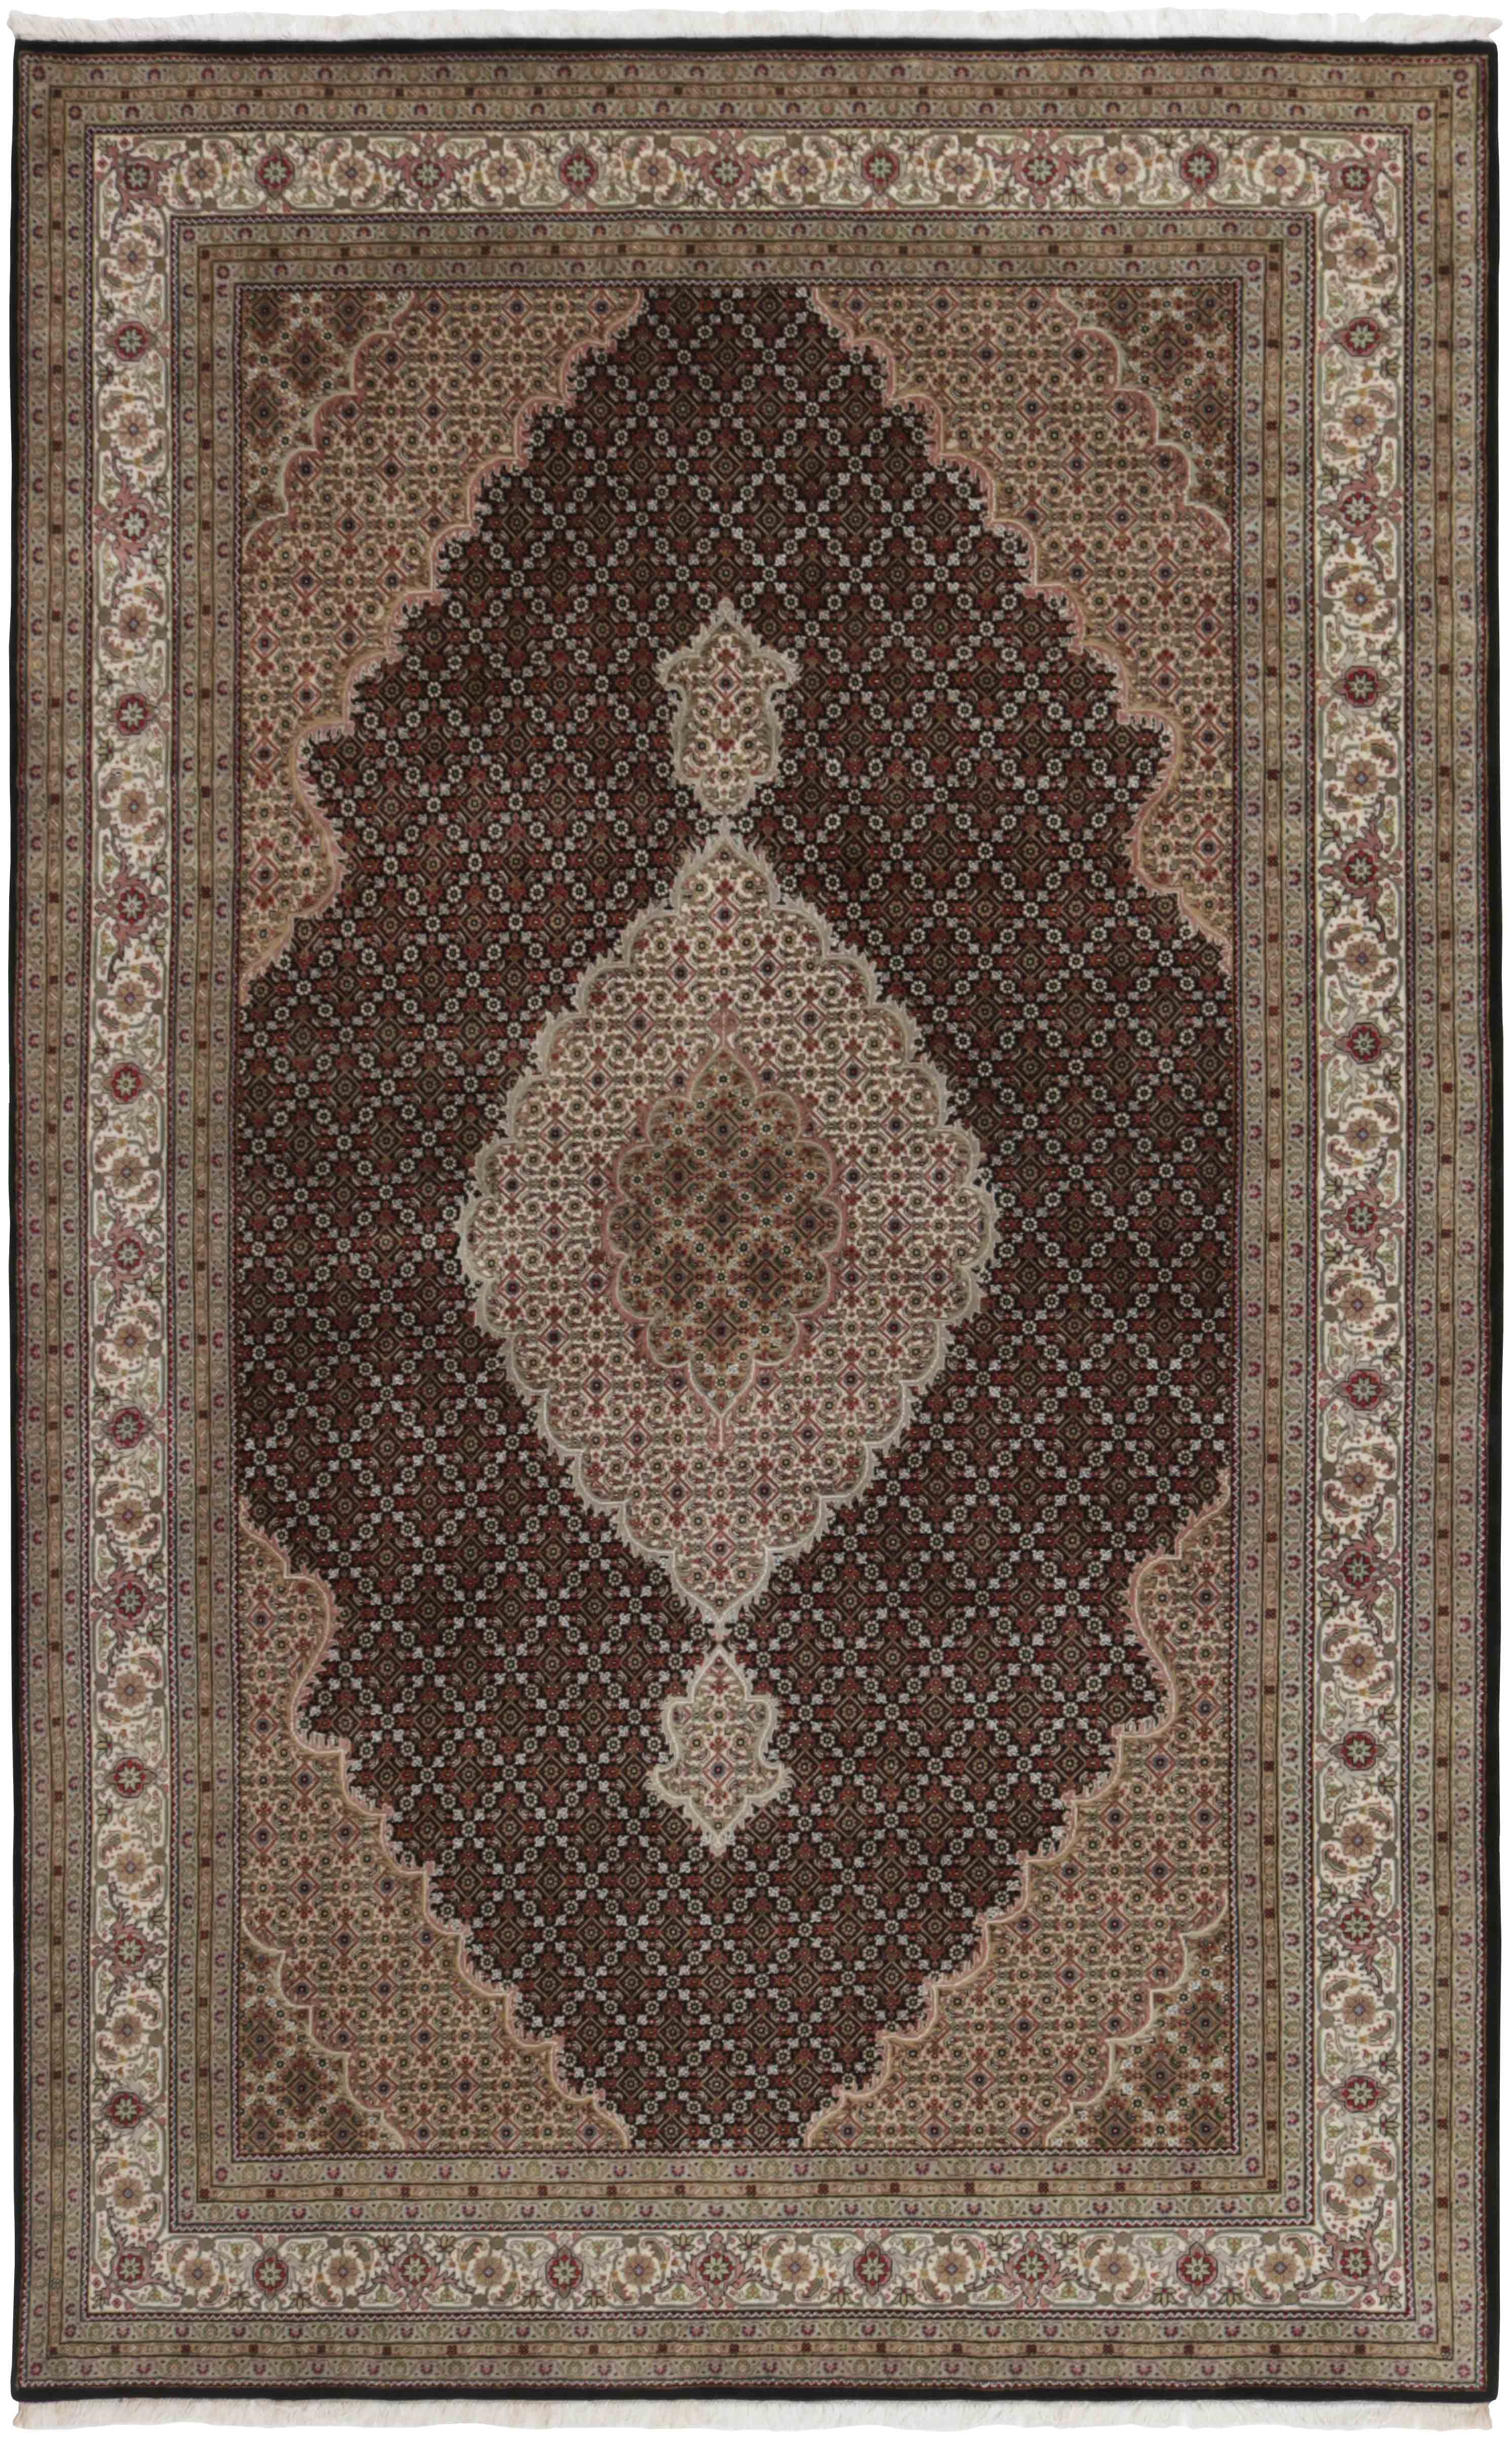 Authentic Oriental rug with traditional geometric and floral design in red, grey, black and beige.